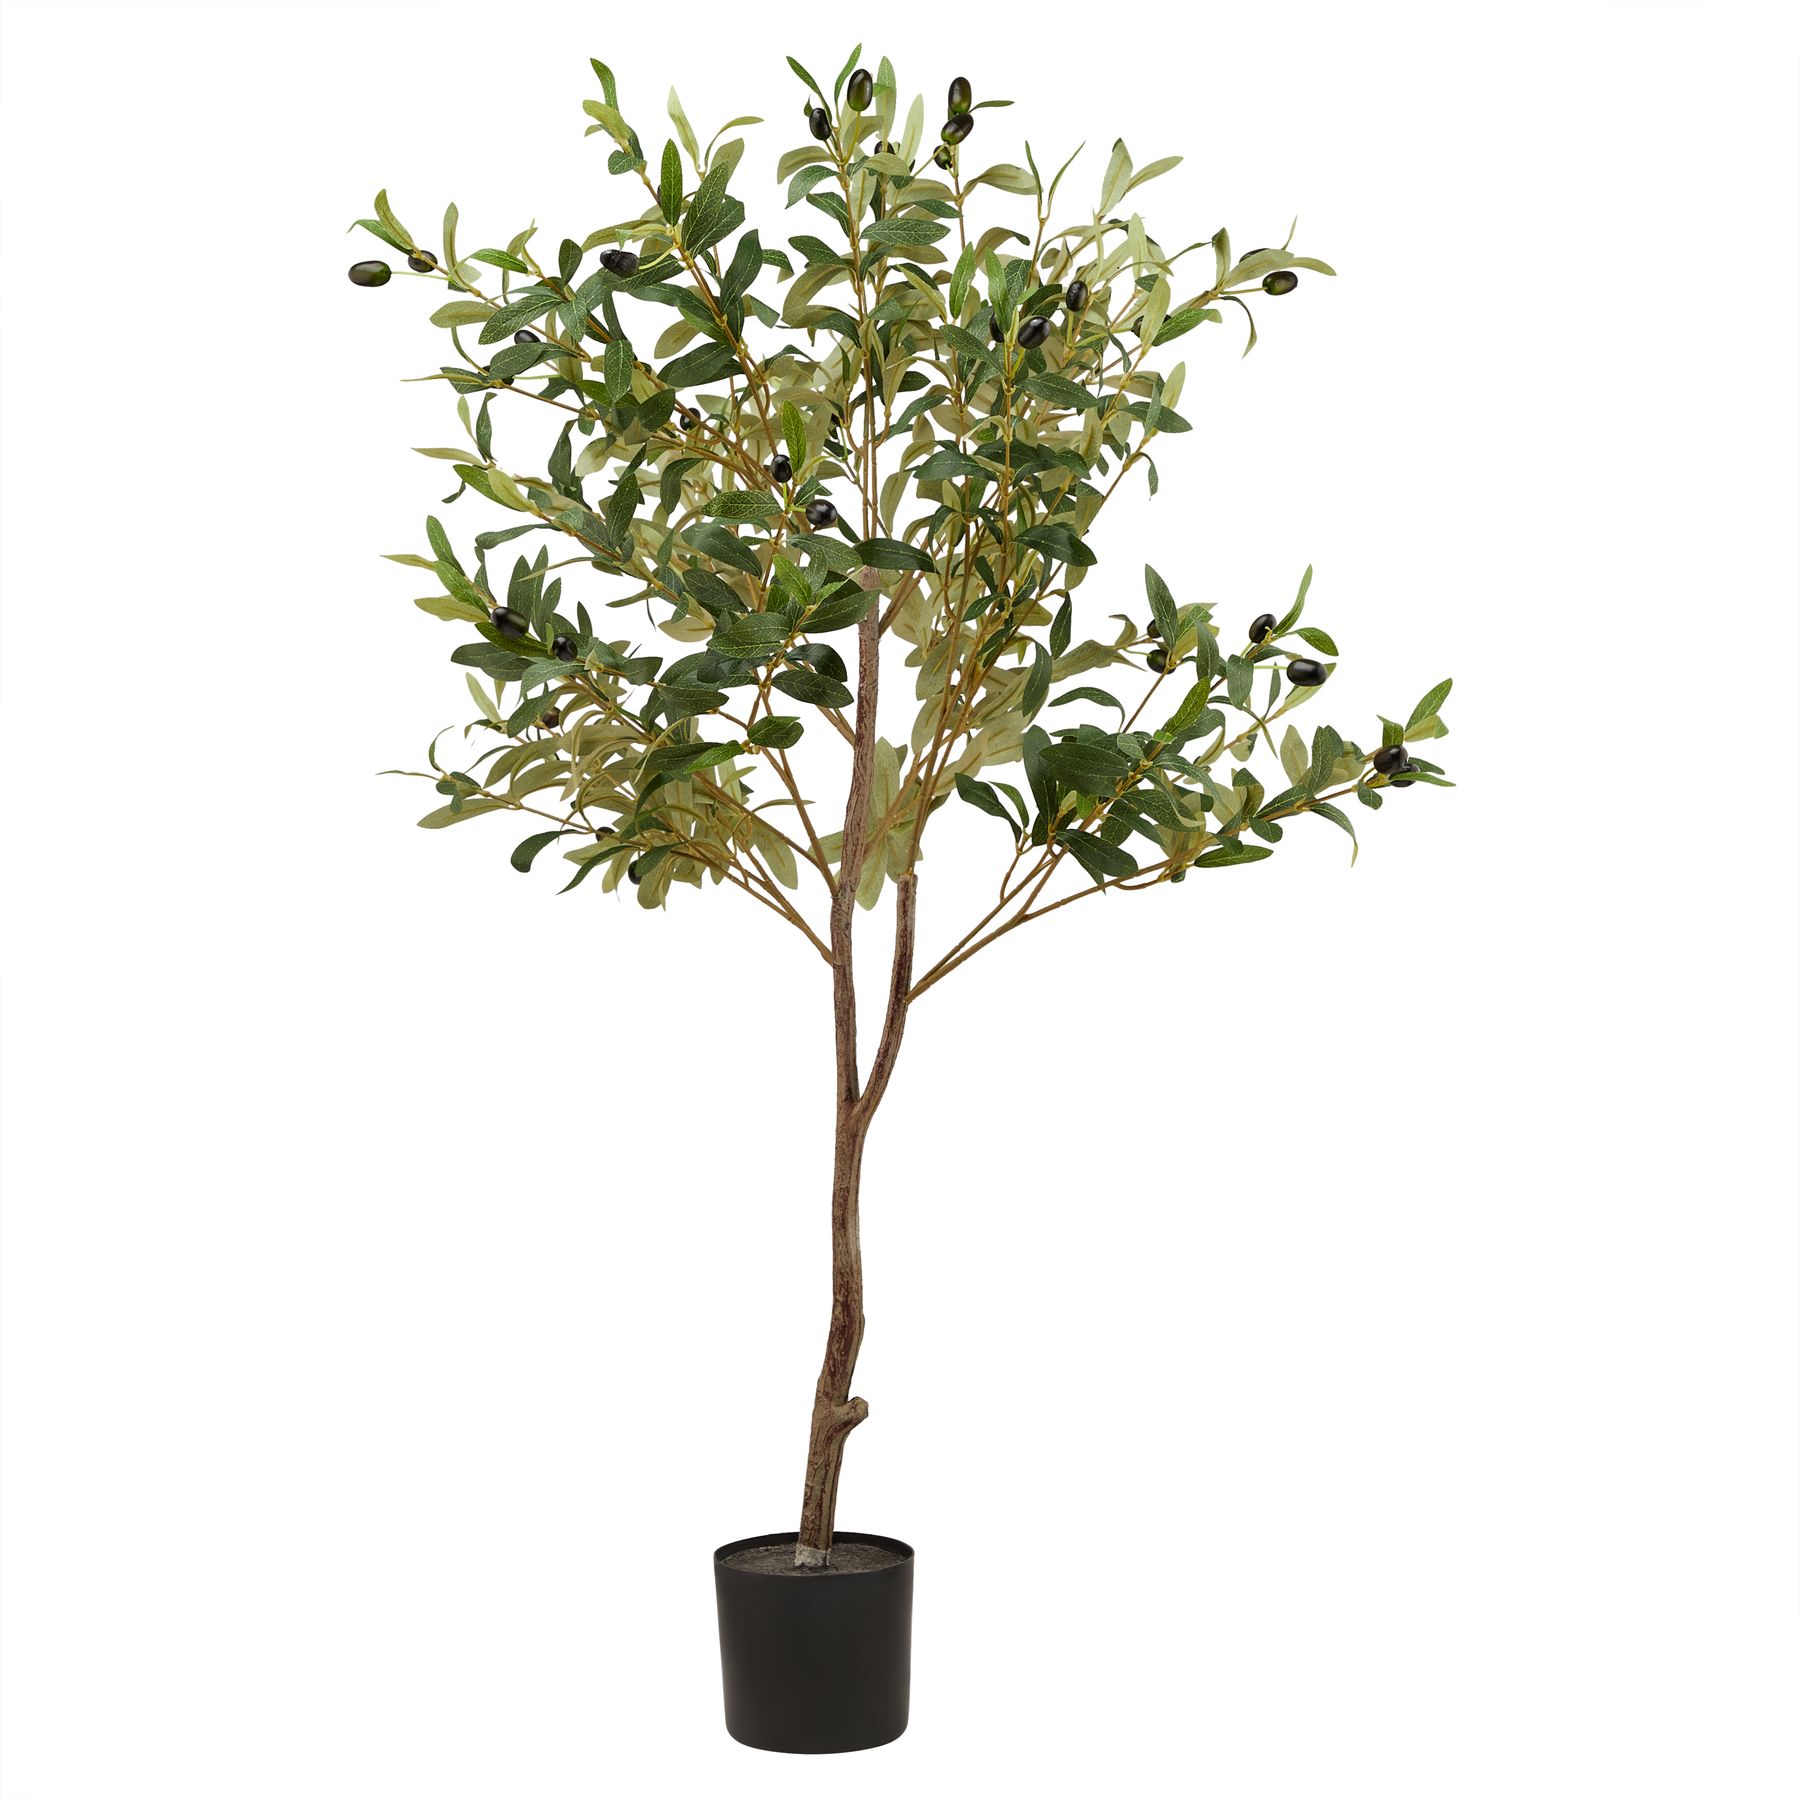 Calabria Small Olive Tree - Image 1